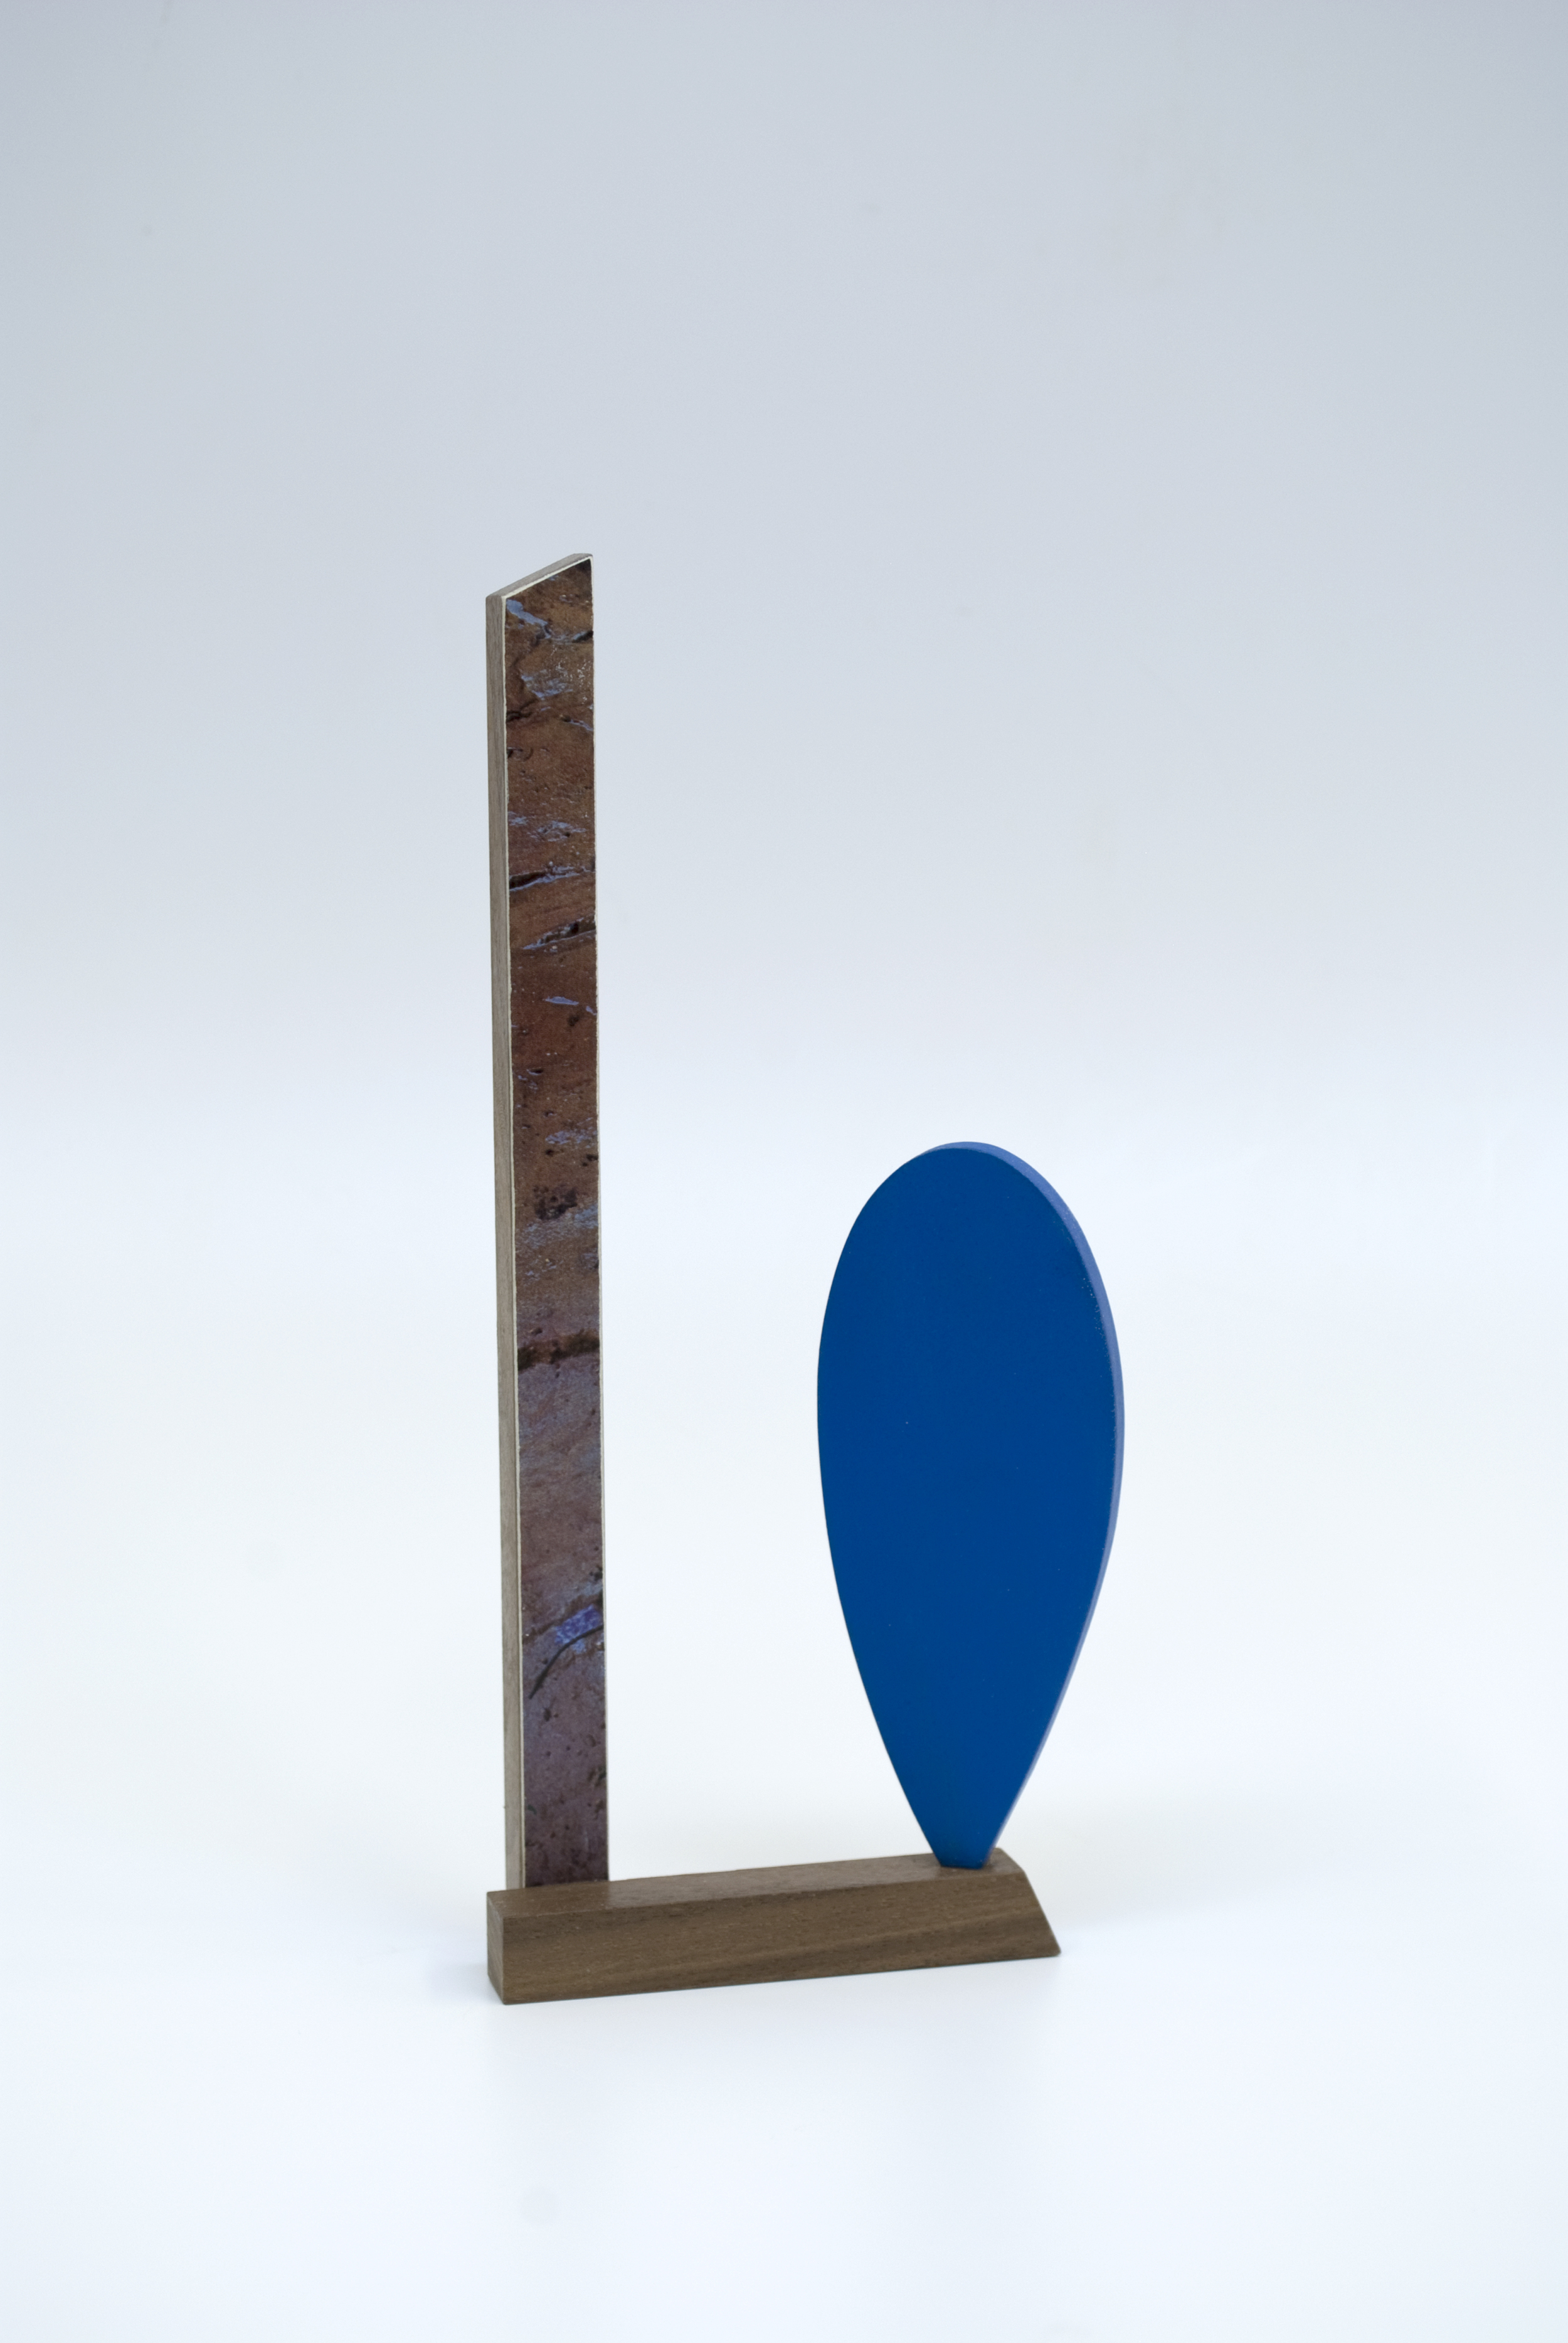   Maquette 9 , 2015  8 x 3 x 1 inches  Wood, paint, found image 